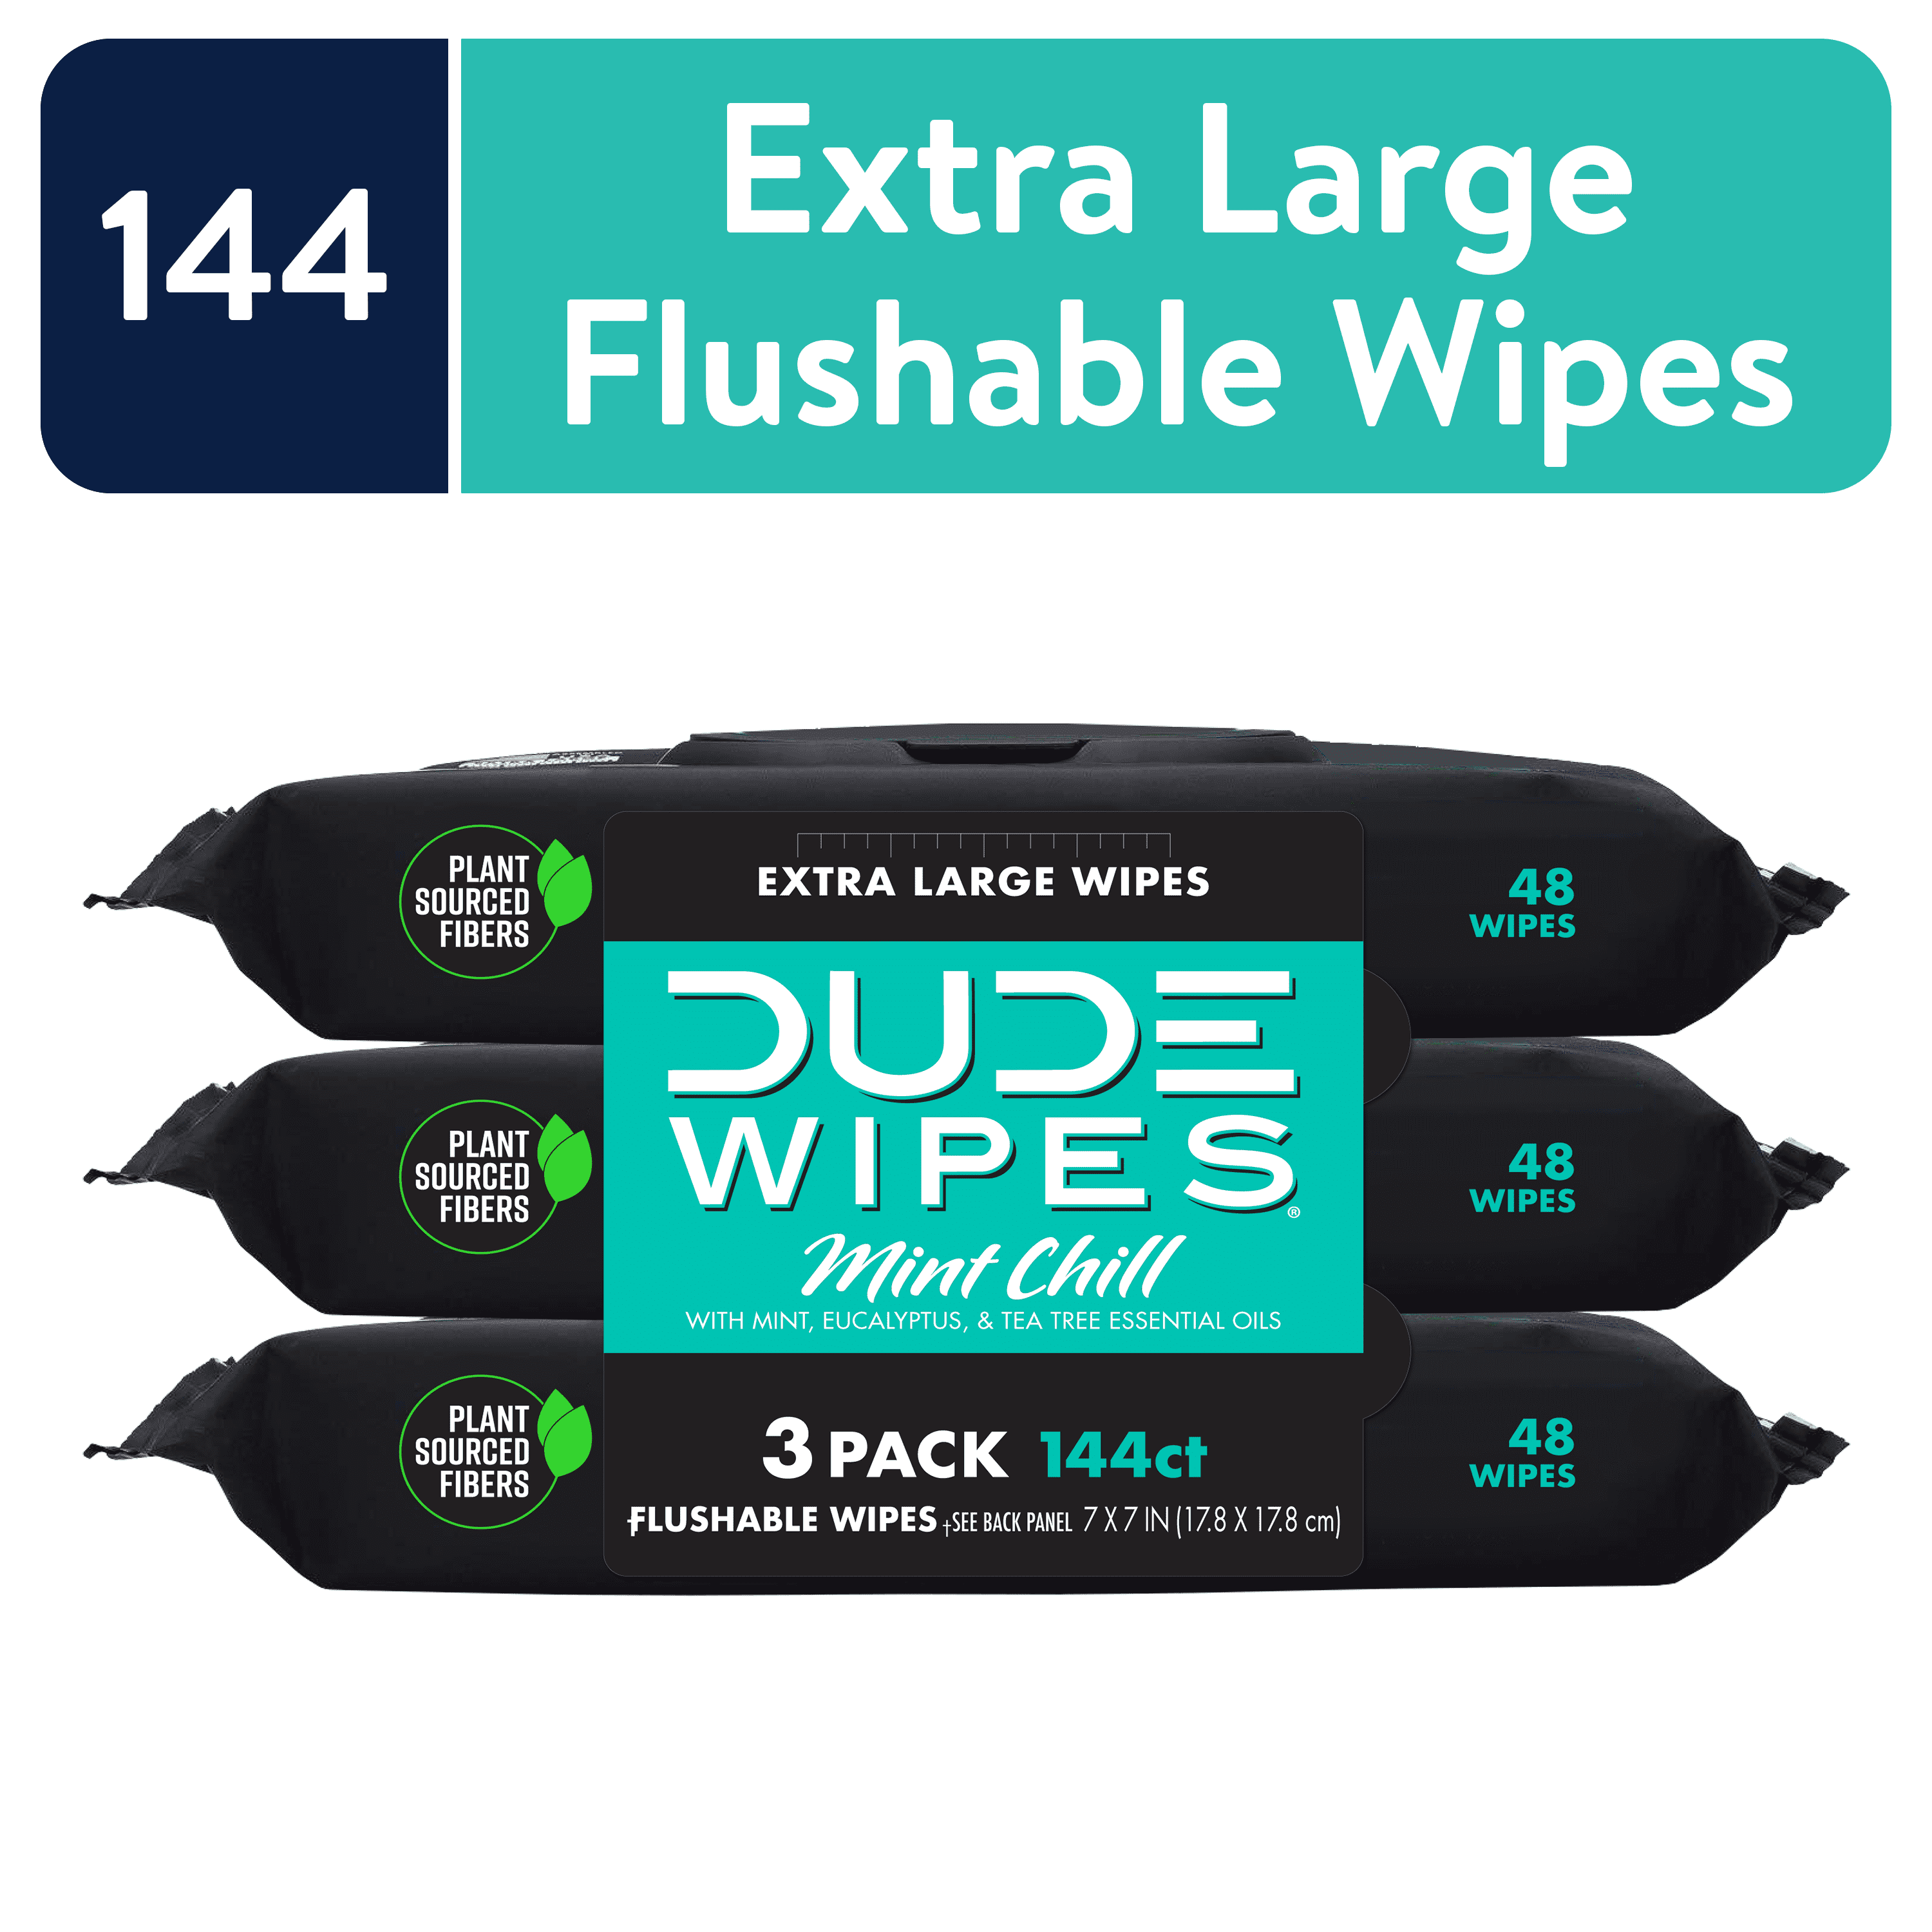 DUDE Wipes Flushable Wipes, Mint Chill XL Wet Wipes to Use with Toilet Paper, 48 Ct, 3 Pack